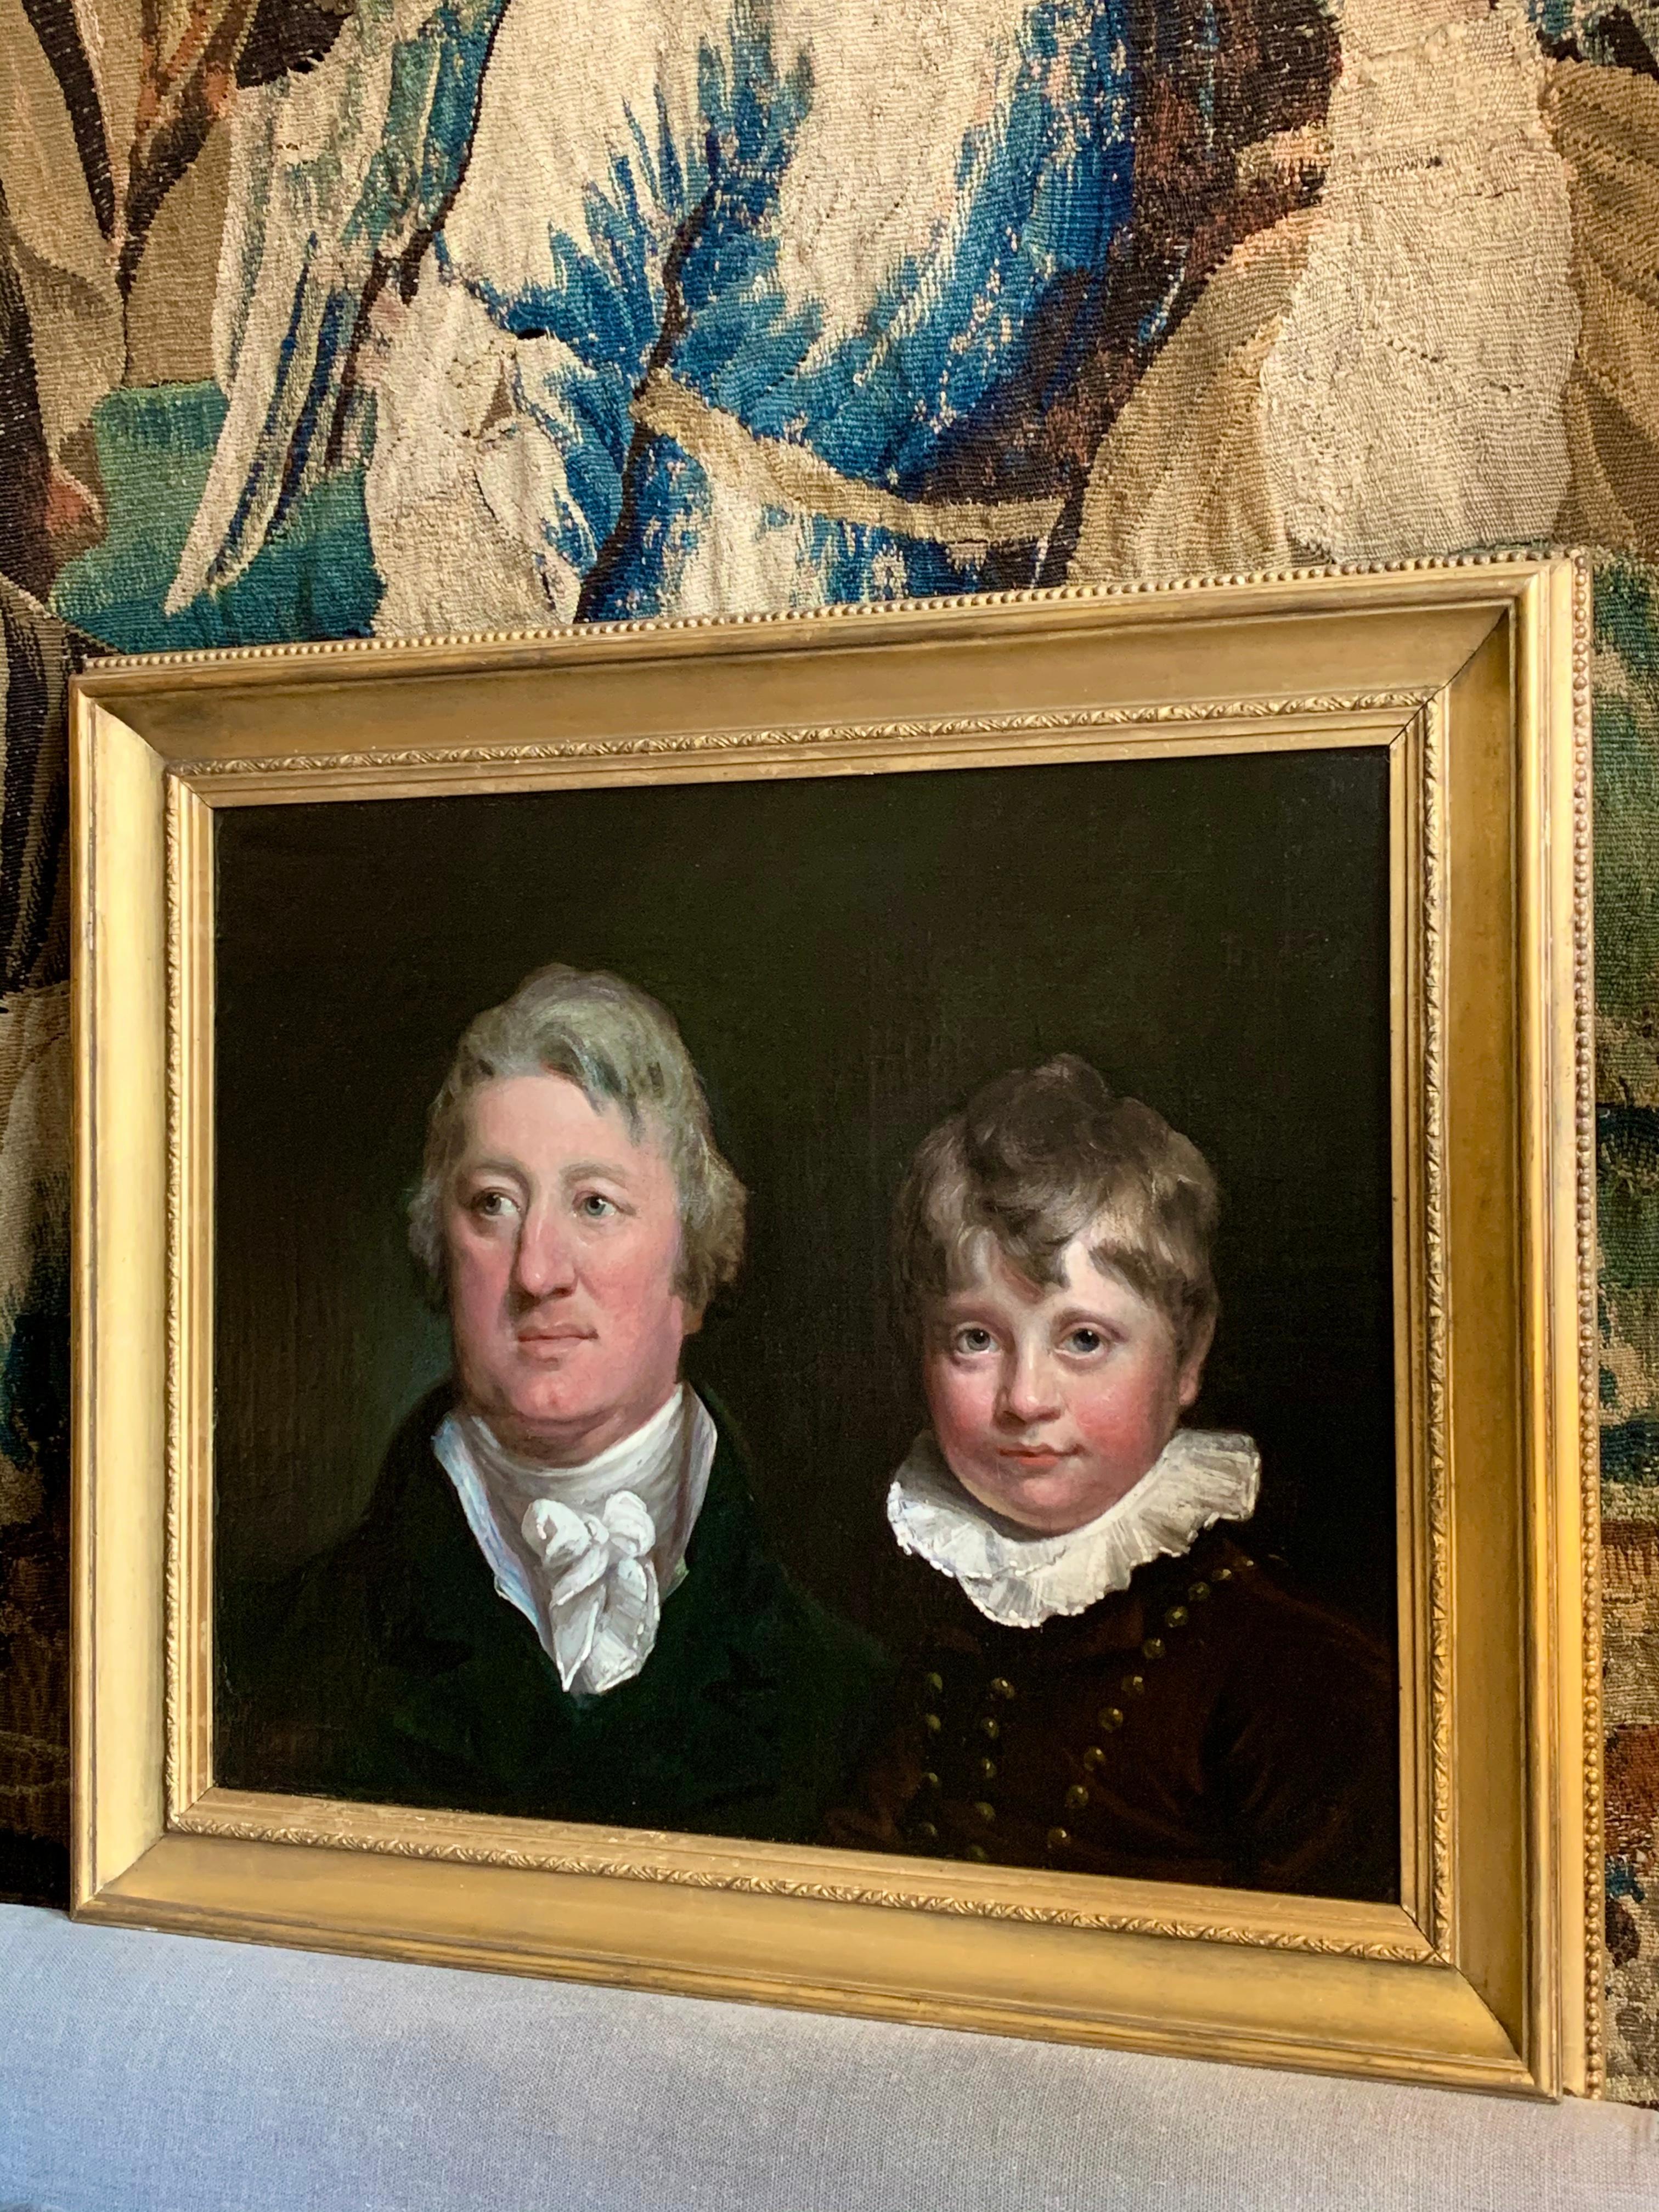 Early 19th Century English Oil Portrait Painting of a Gentleman and a Young Boy. 3